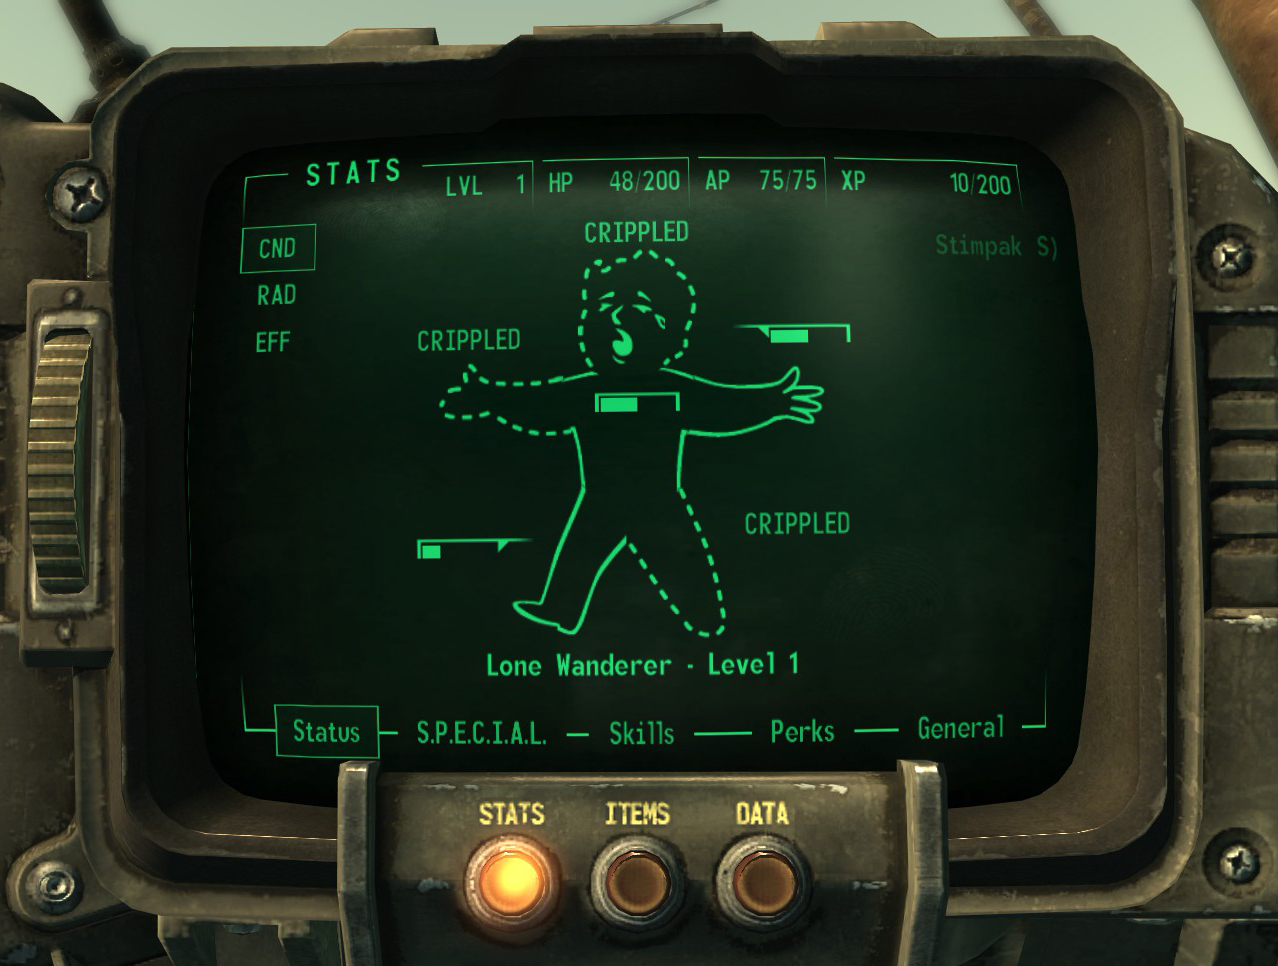 pipboy remover fallout 4